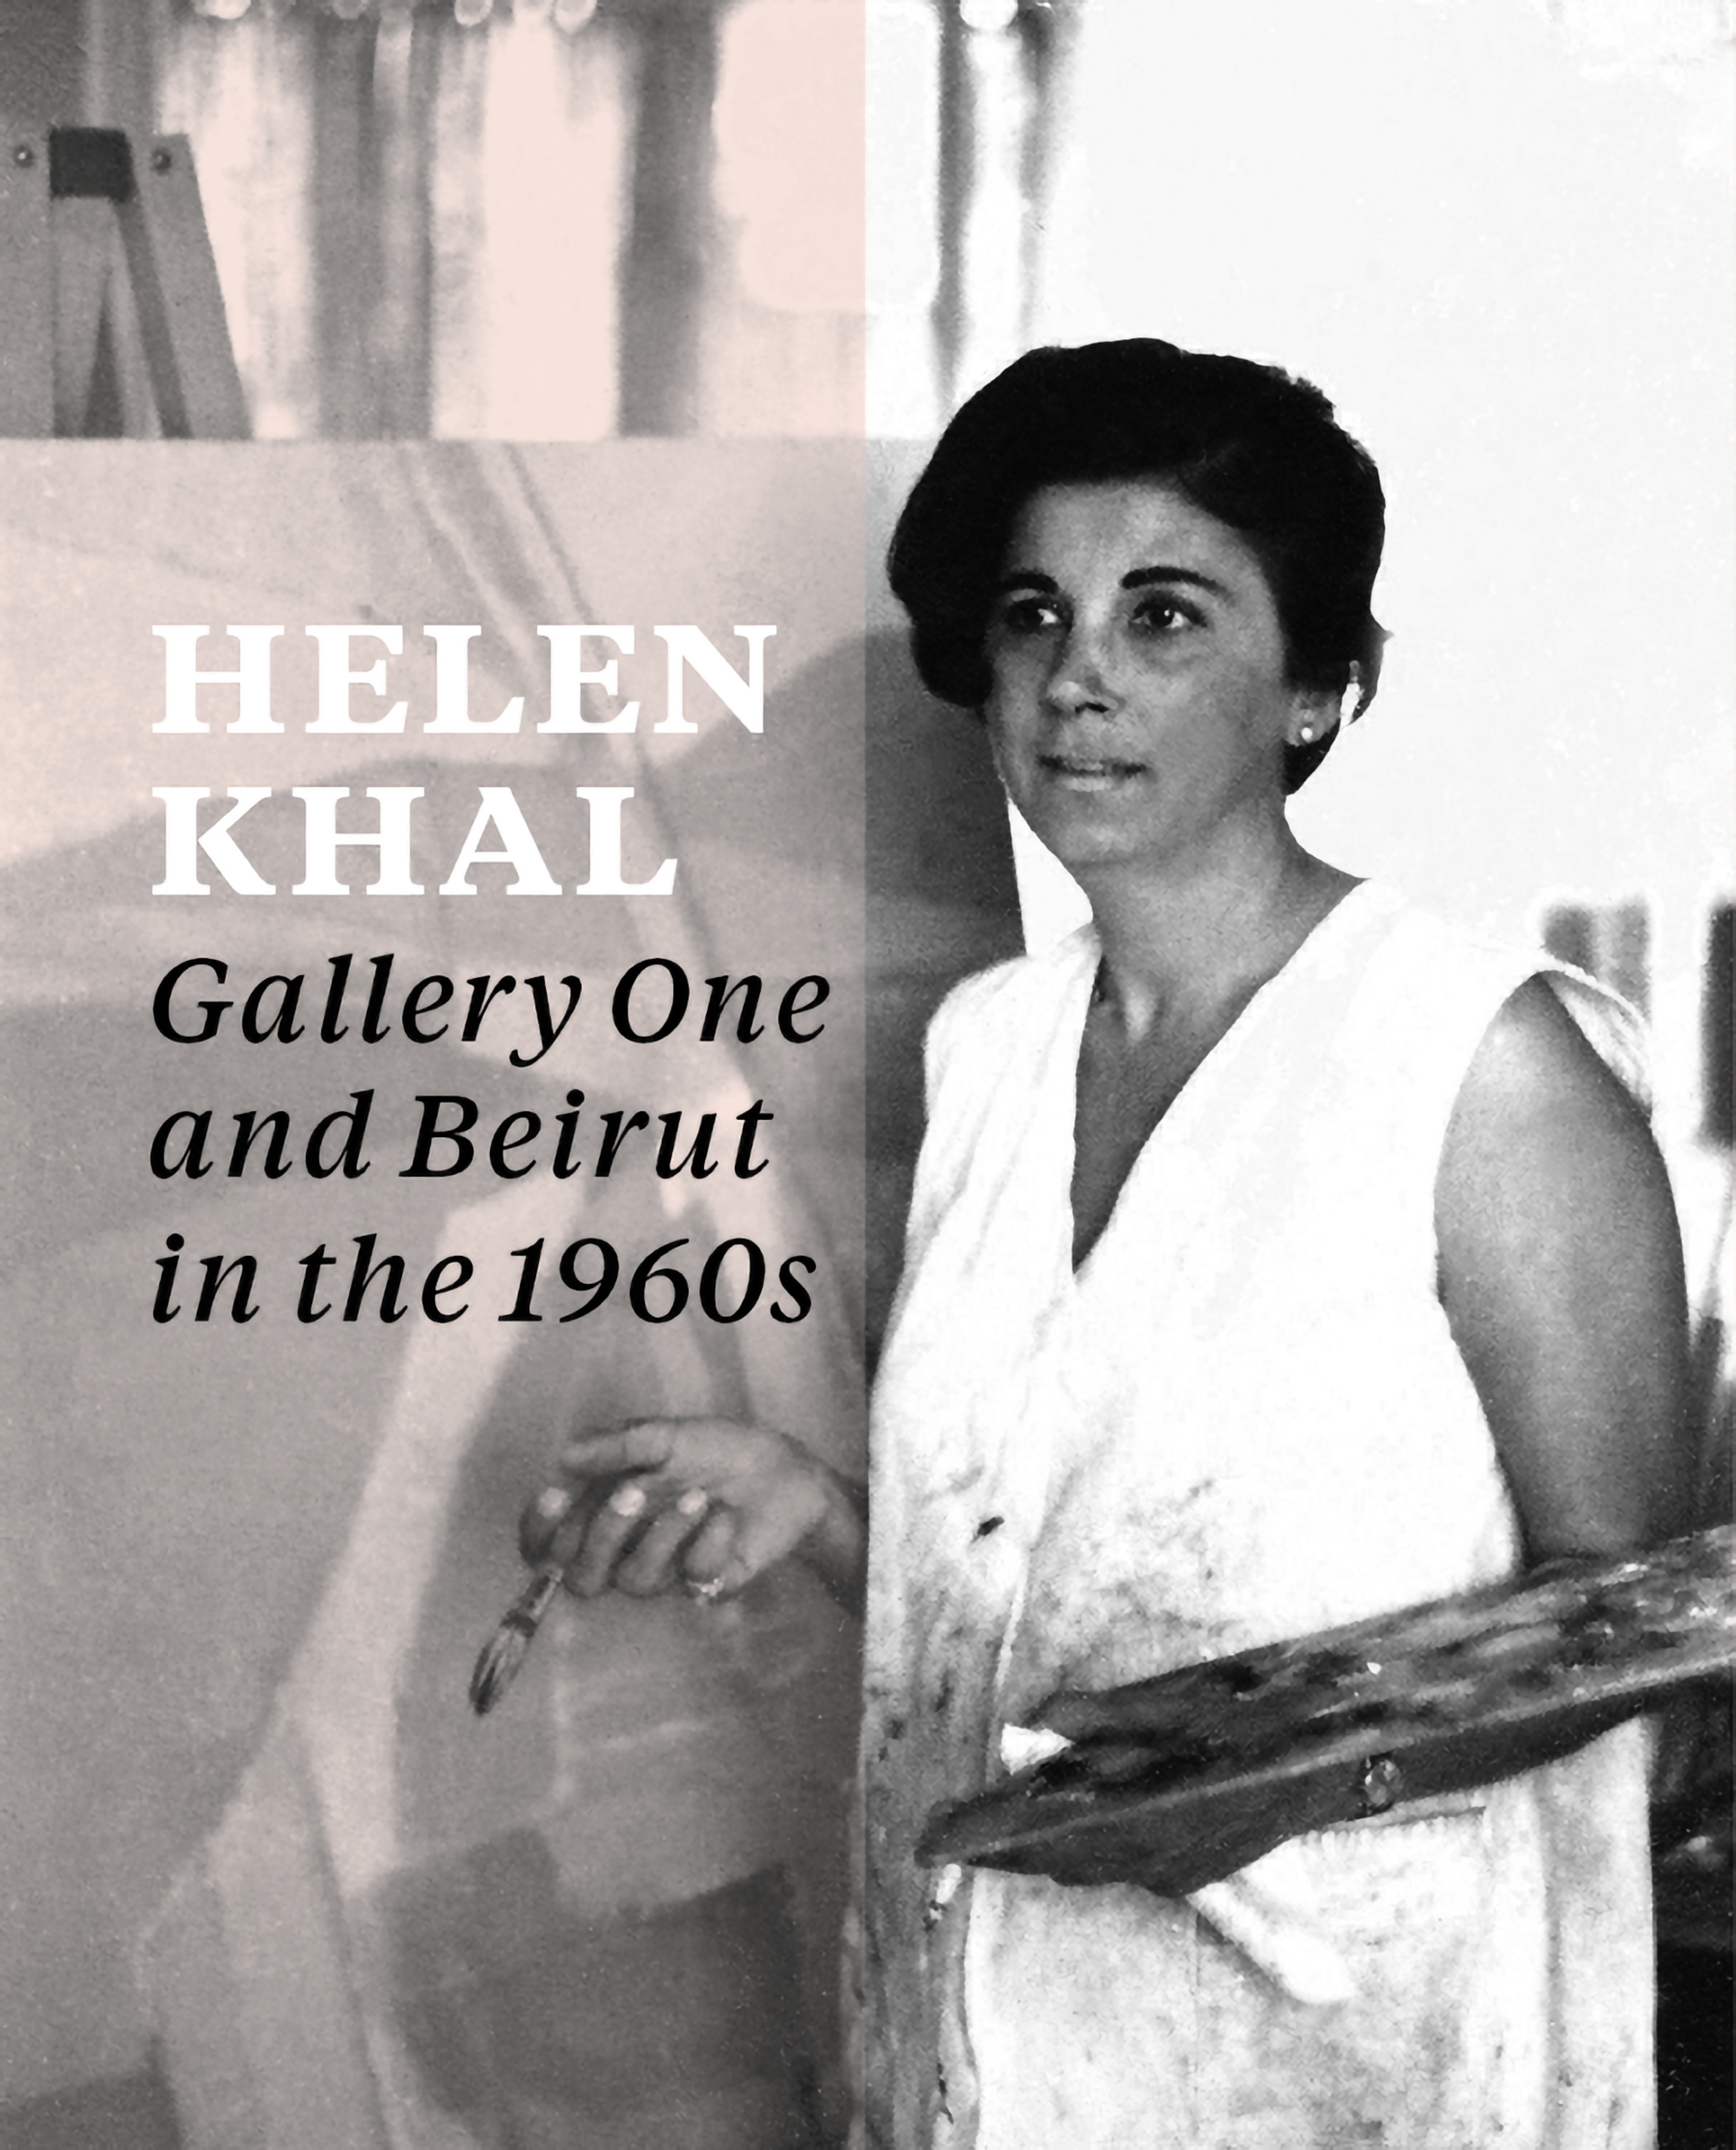 Helen Khal: Gallery One and Beirut in the 1960s